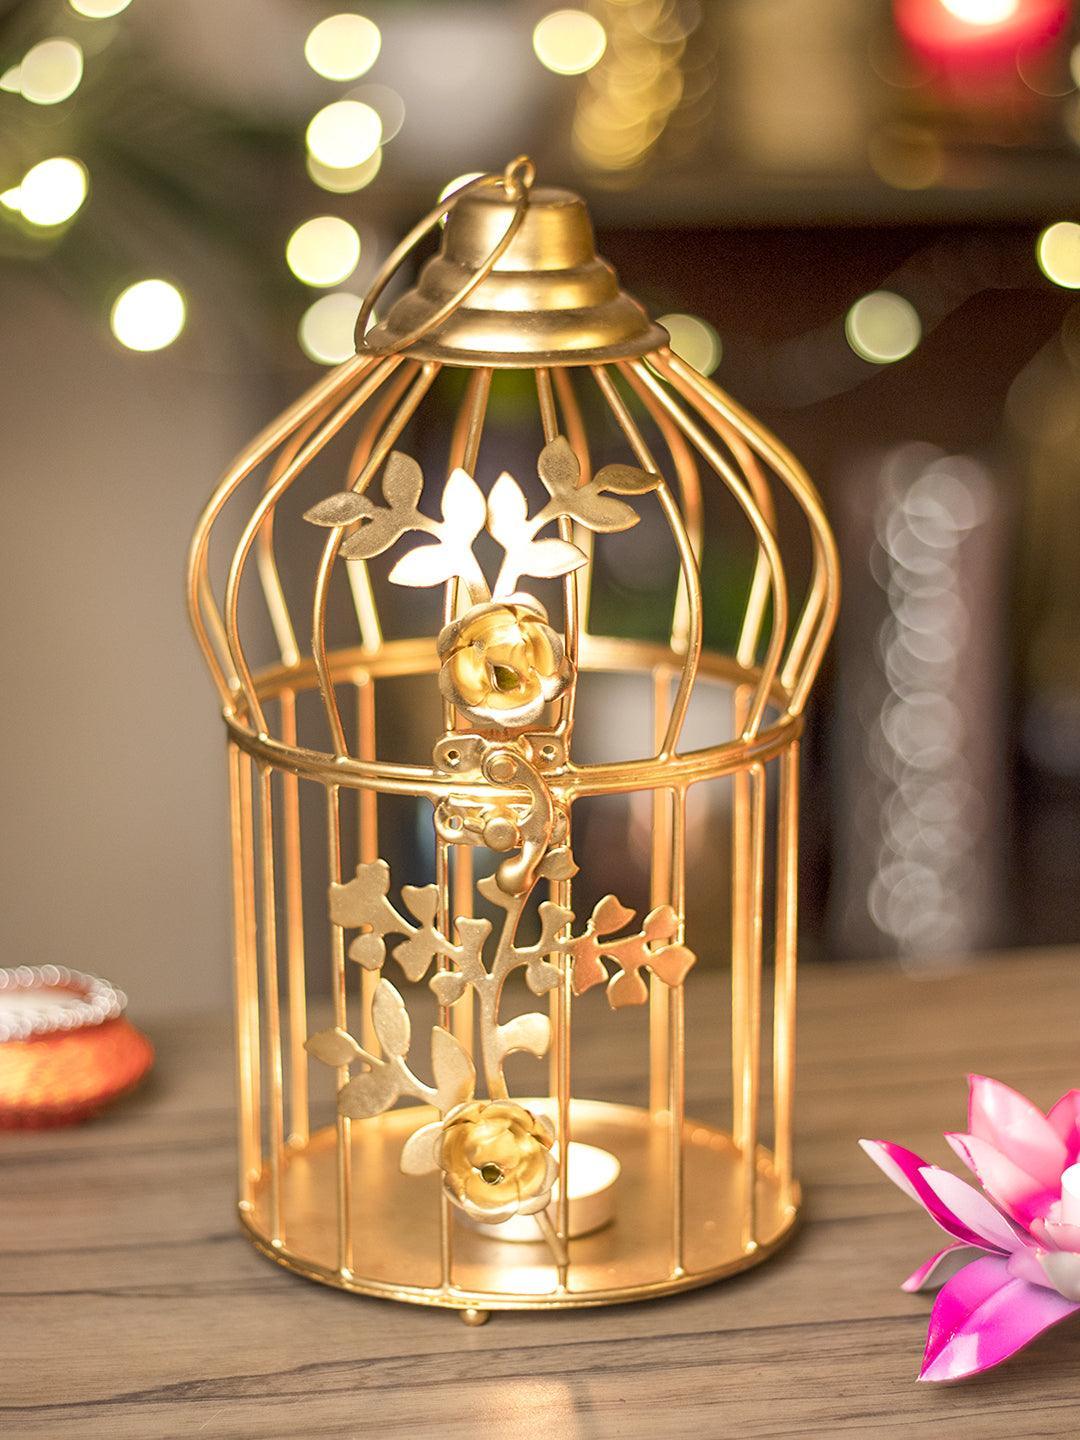 Buy Decorative Bird Cage at the best price on Wednesday, March 27